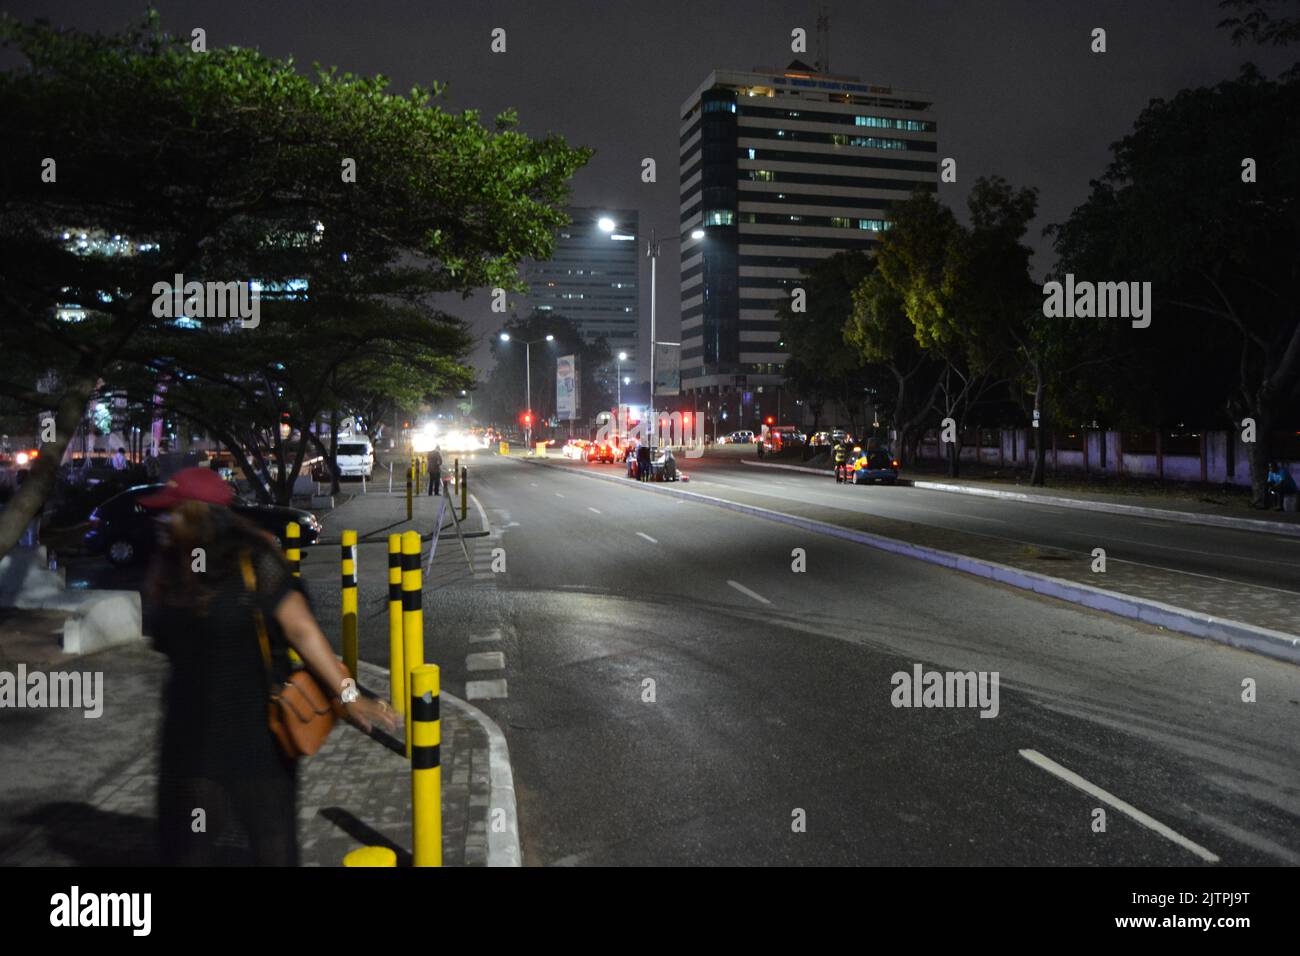 A main street in Accra. At night Stock Photo